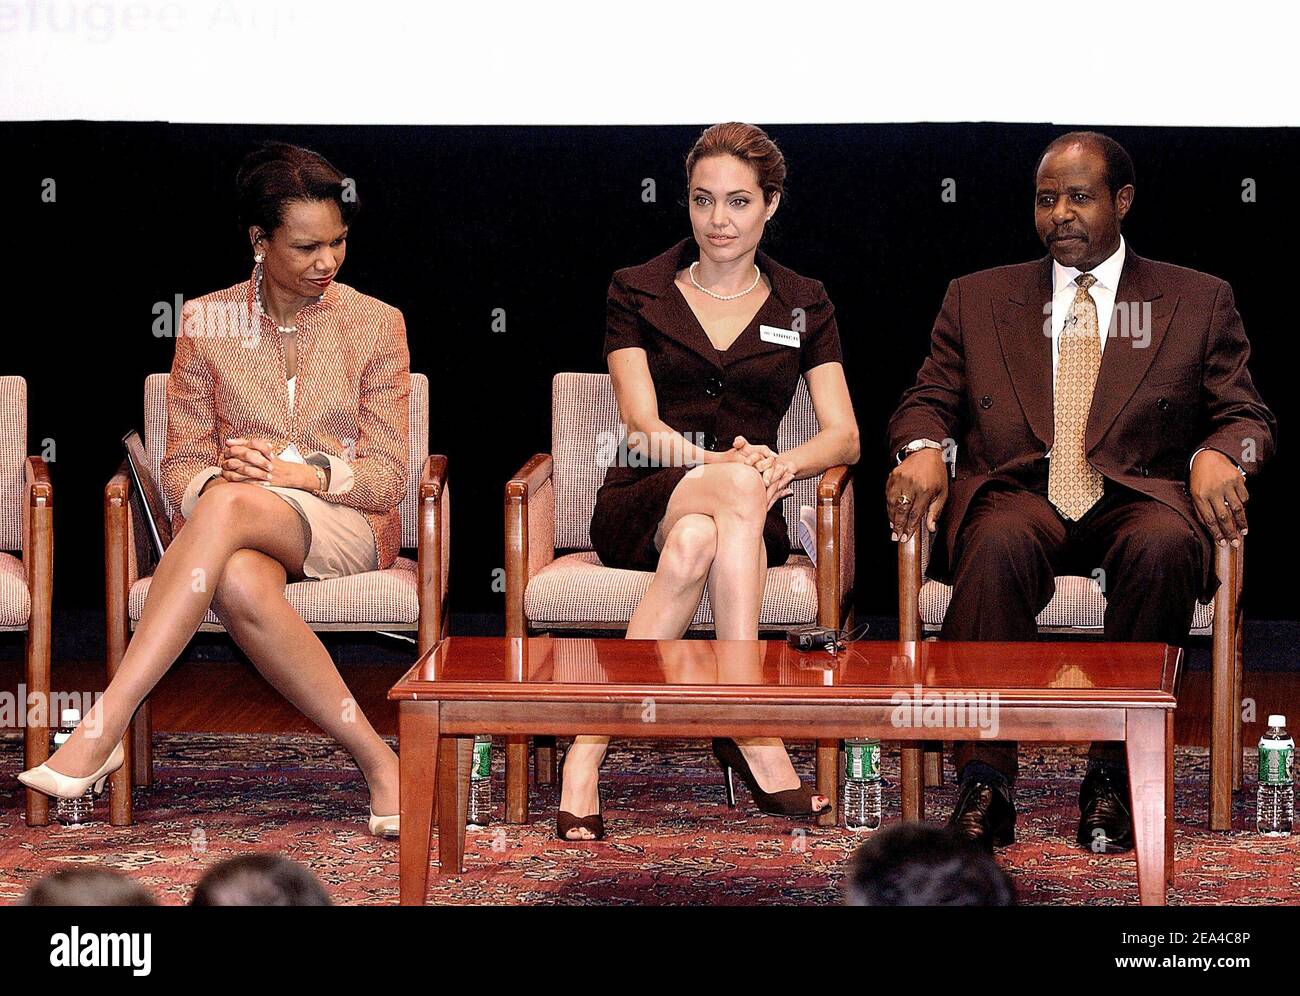 Secretary of State Condoleezza Rice attends an event to commemorate World Refugee Day with Angelina Jolie, actress and United Nations High Commissioner for Refugees goodwill ambassador and refugee speaker Paul Rusesabagina at the National Geographic Museum on June 15, 2005 in Washington, DC, USA. Photo by Olivier Douliery/ABACA. Stock Photo